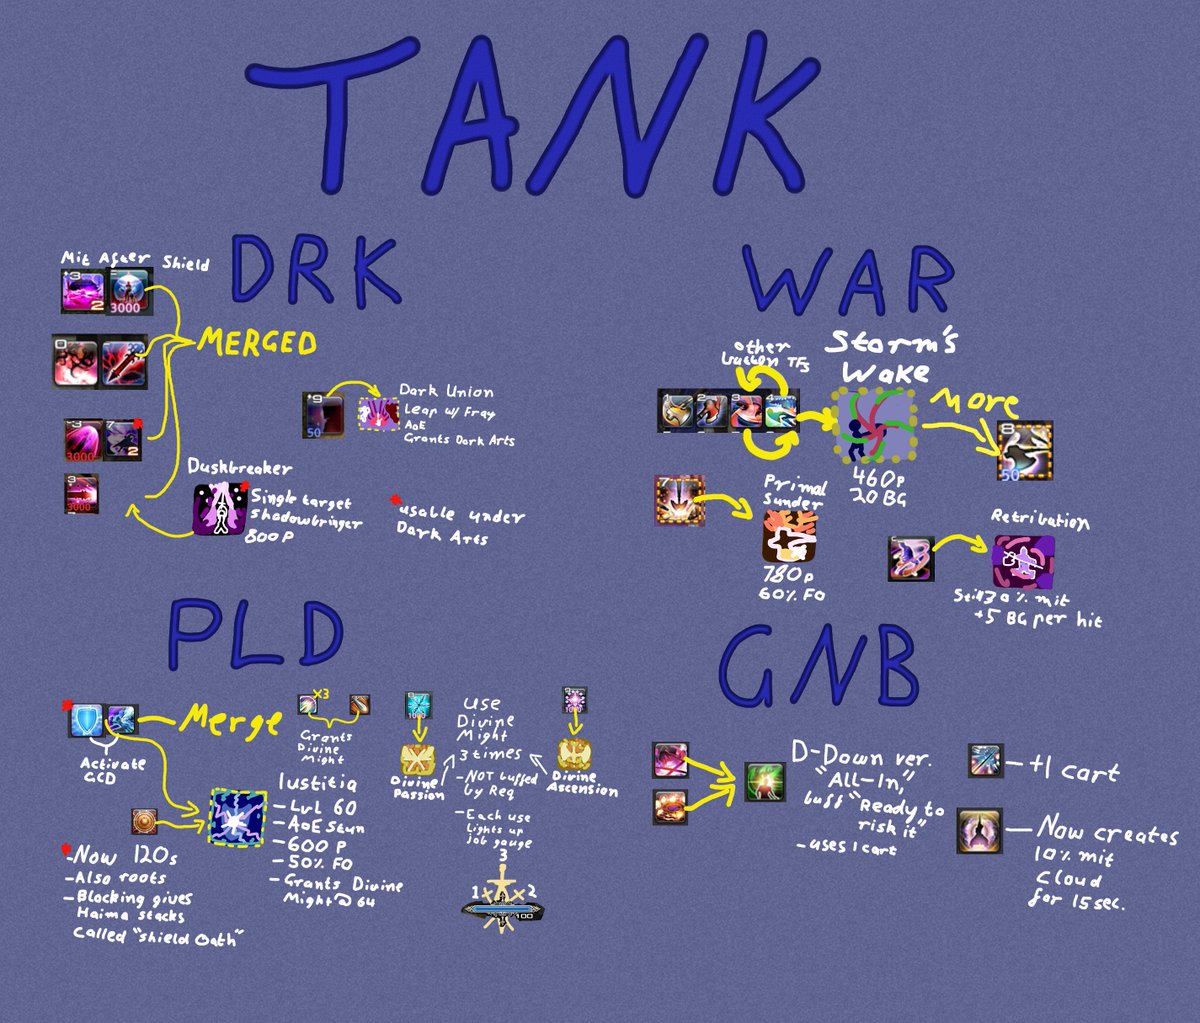 #FFXIV Job Adjustments Live Letter's in like a day and a half.

Here's some Probably Stupid Tank Predictions™ I came up with!